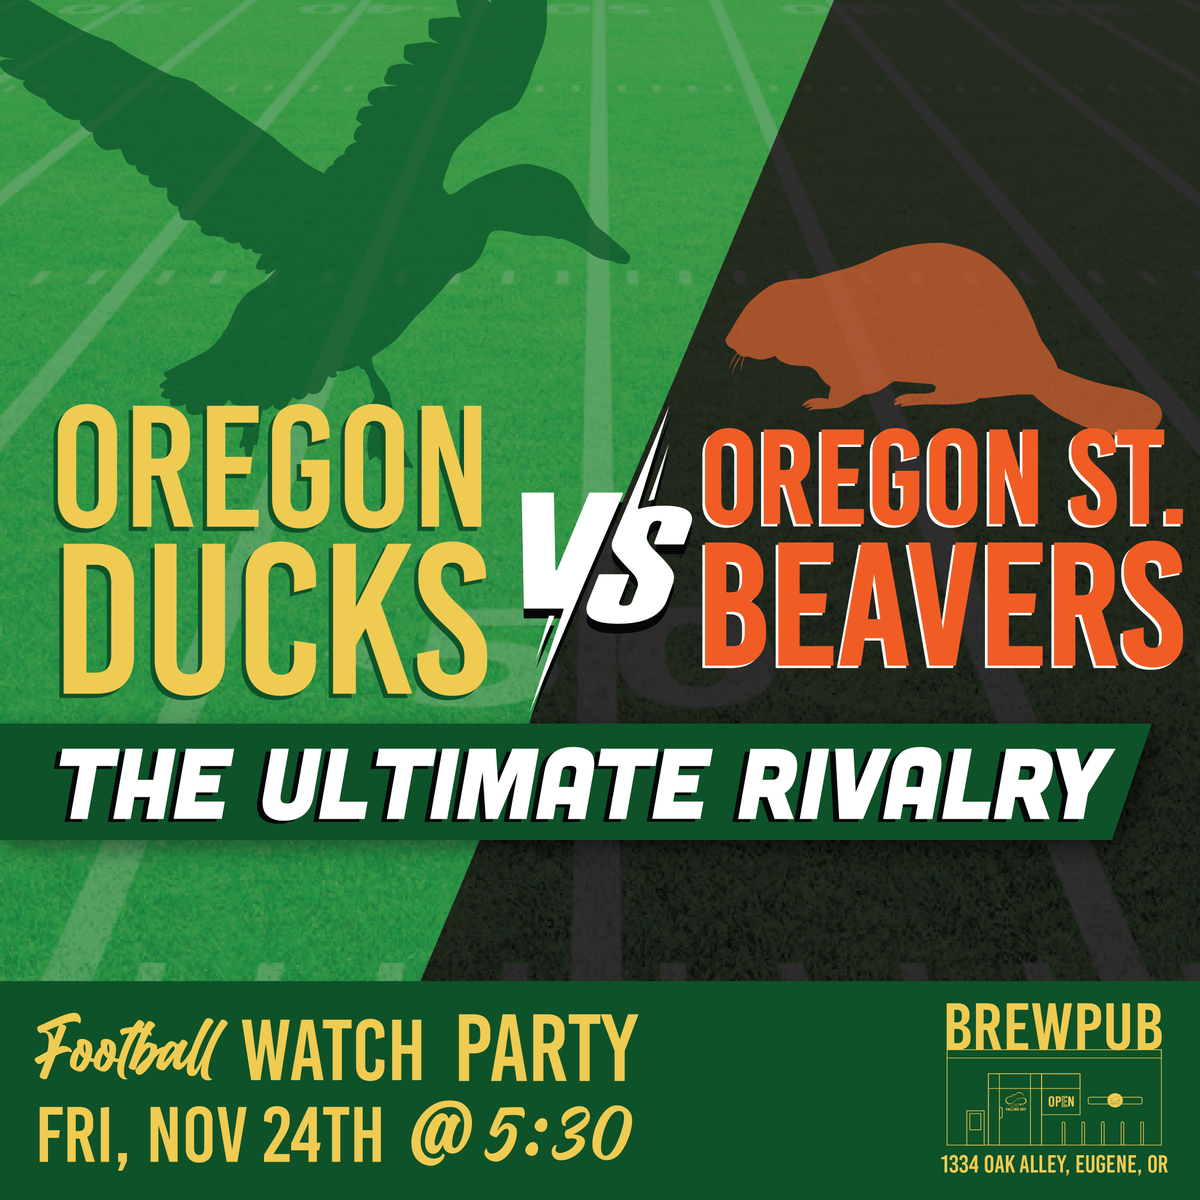 The ultimate Watch Party between Oregon Ducks and Beavers is going on at Falling Sky. Come in for good food, beer, and to witness this epic state rivalry unfold! 
#WatchParty #GoDucks #CollegeFootball #PubFun #GameDay #UniversityOfOregon #LetitPour #craftbeer #beerme #UFO